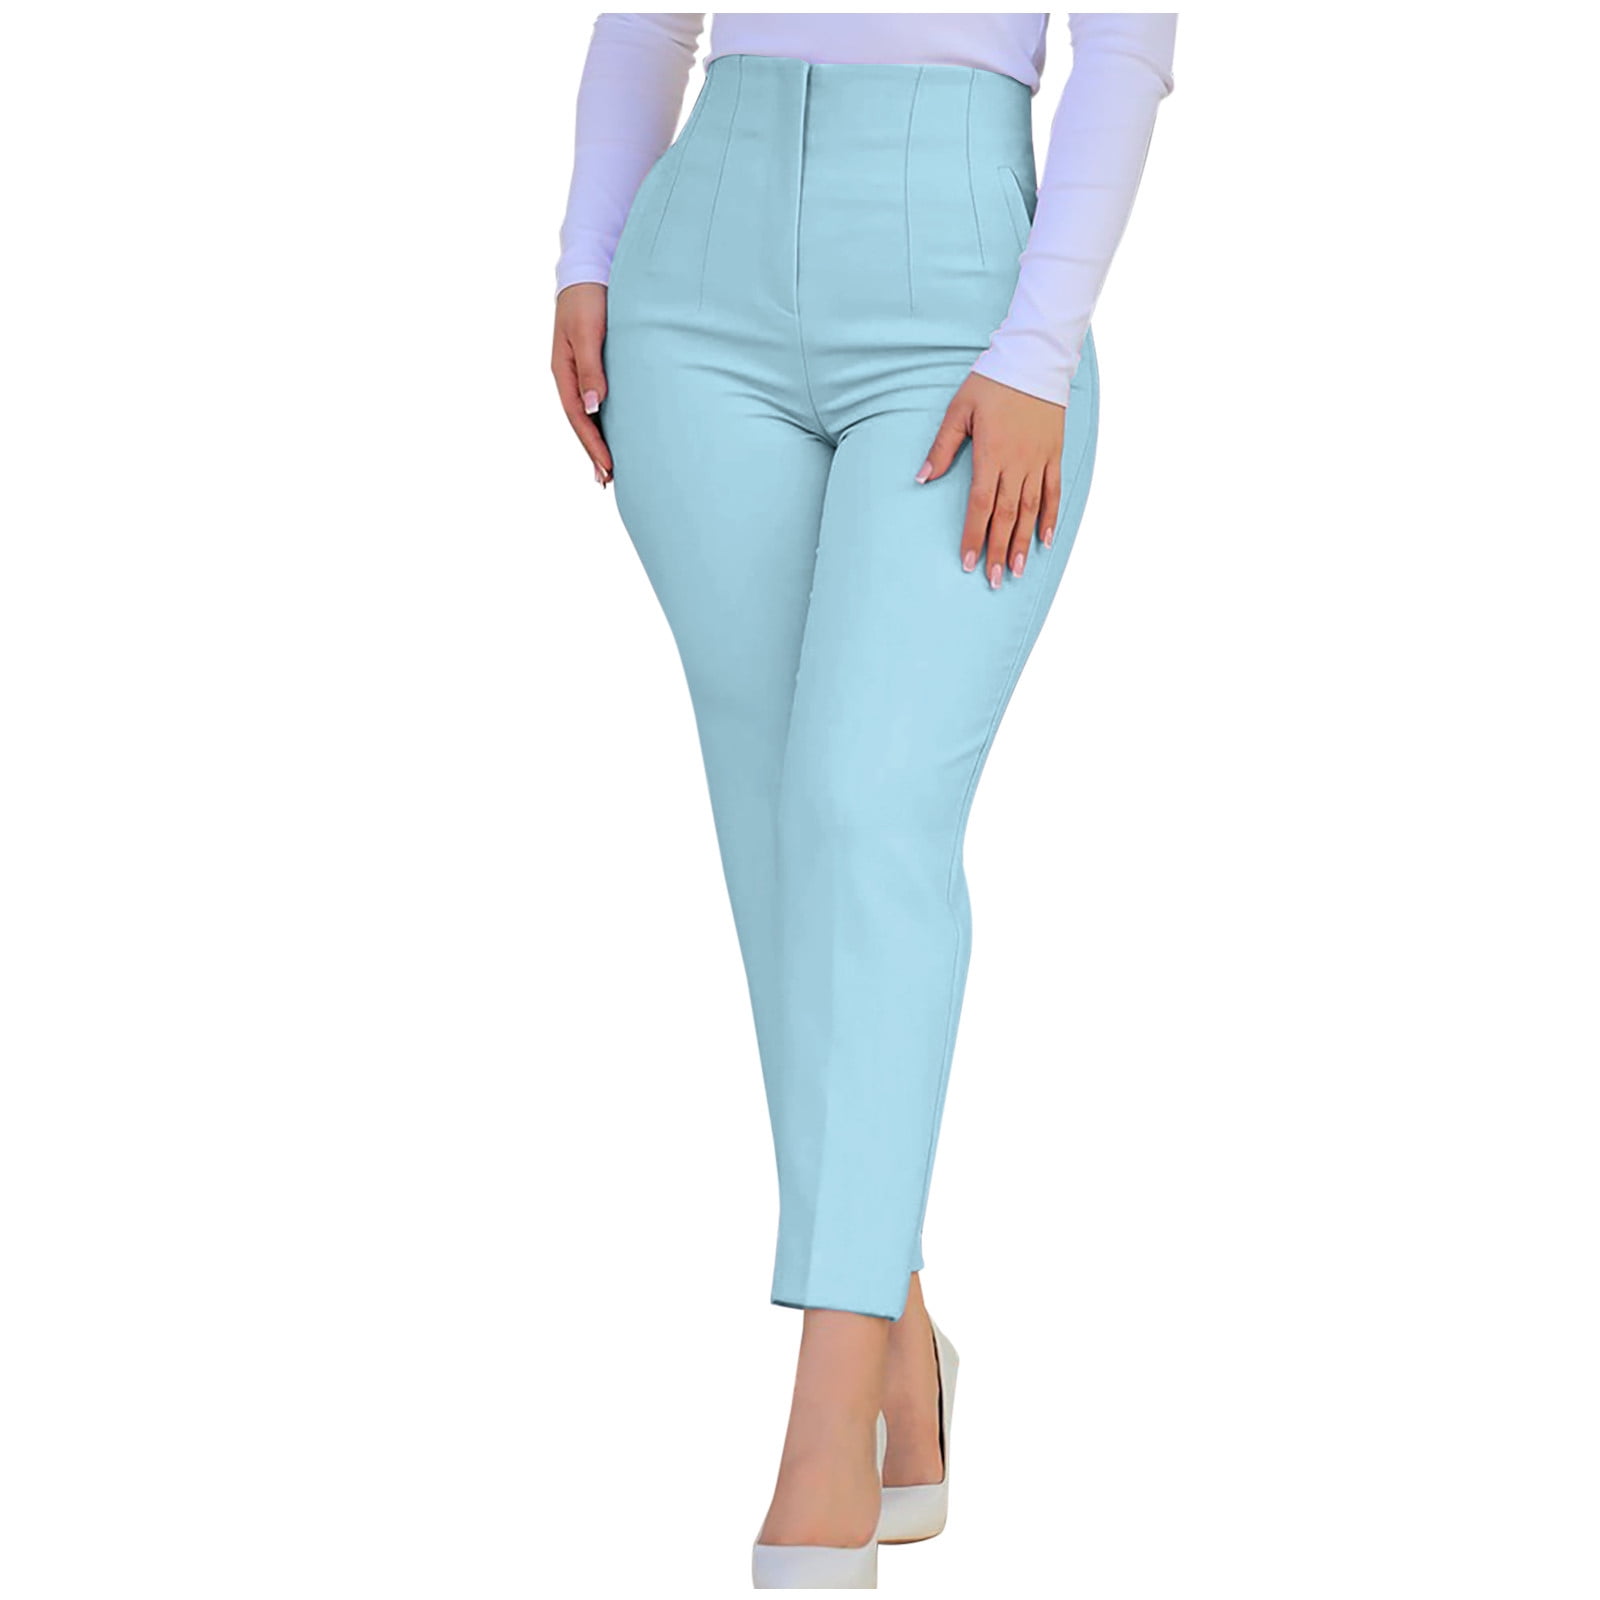 RYRJJ Women's Cropped Dress Pants with Pockets Business Office Casual  Pleated High Waist Slim Fit Pencil Pants for Work Trousers(Light Blue,M)